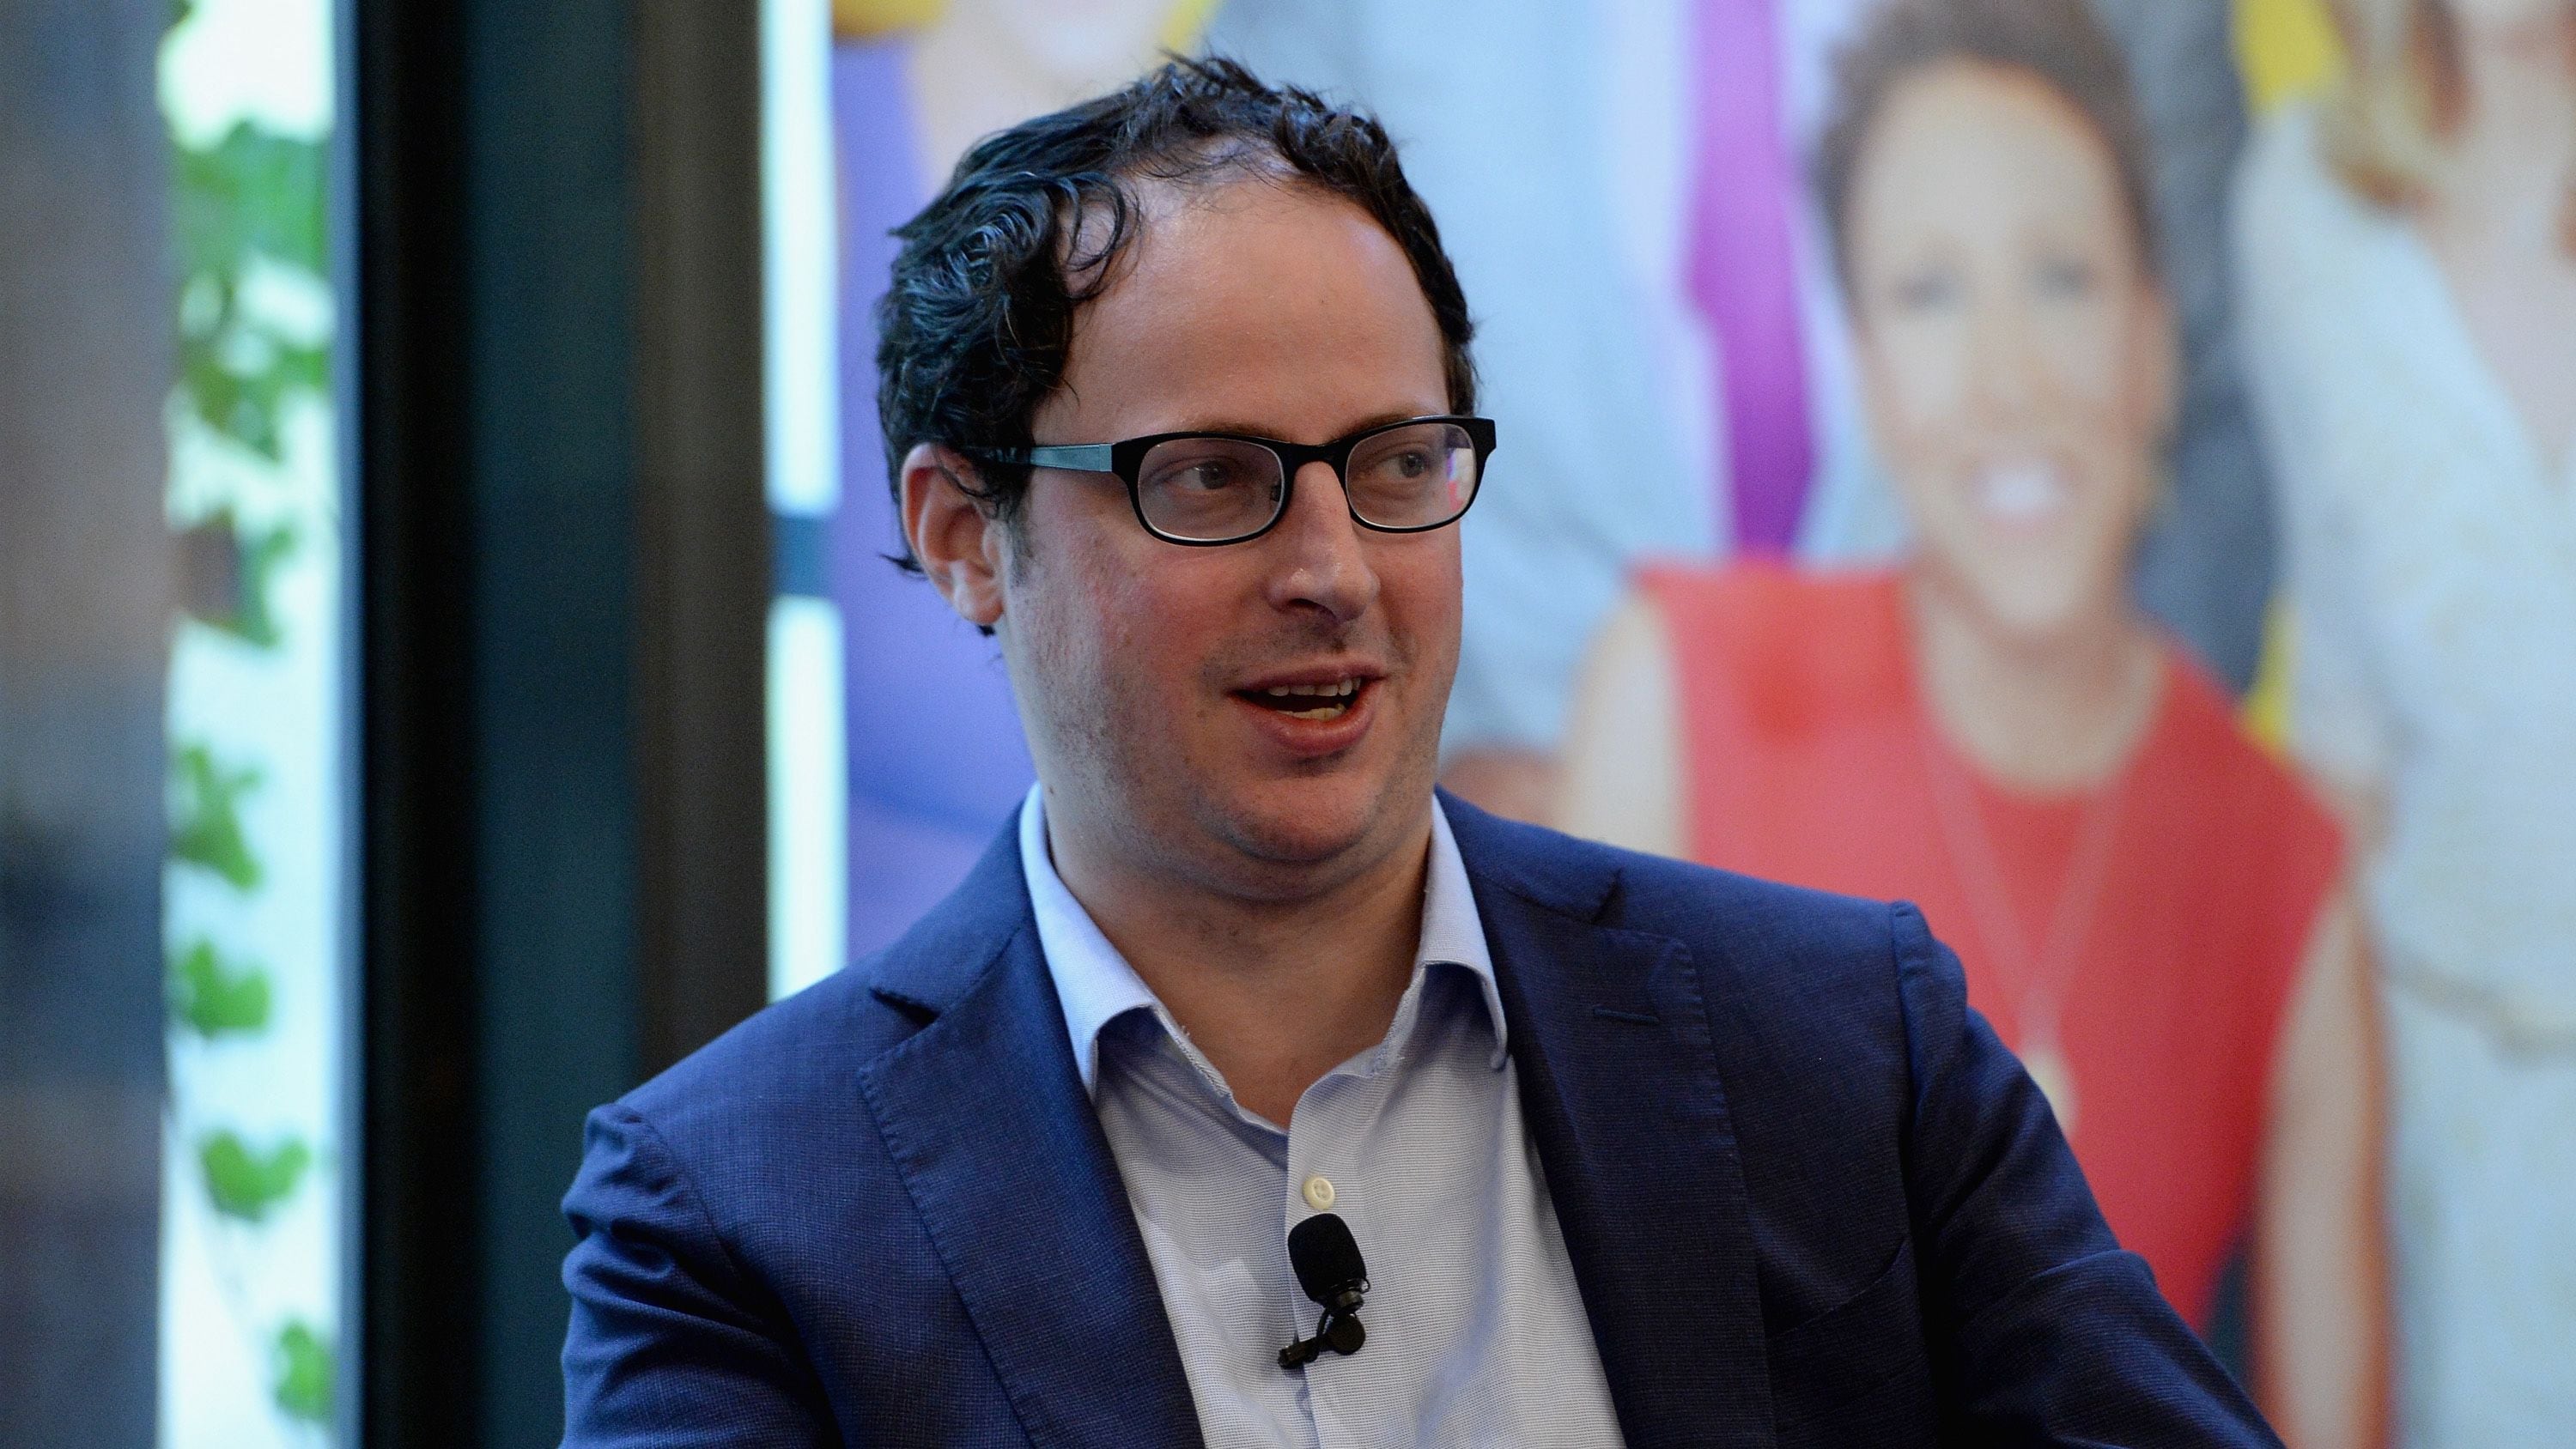 Nate Silver will now reportedly work for prediction market Polymarket. (Slaven Vlasic/Getty Images for AWXII)